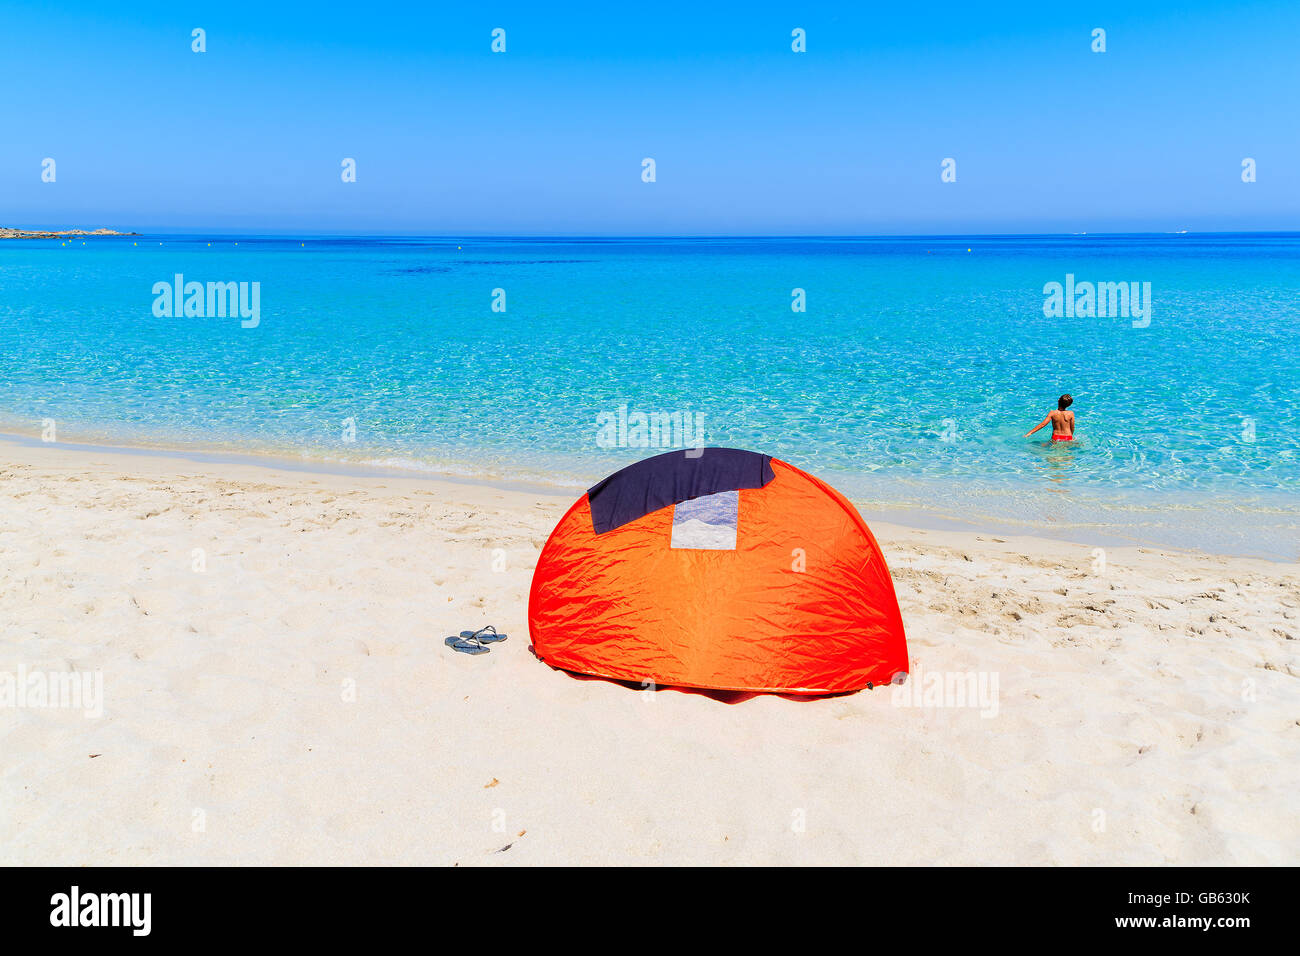 Sunshade tent on sandy Bodri beach and young boy relaxing in water, Corsica island, France Stock Photo